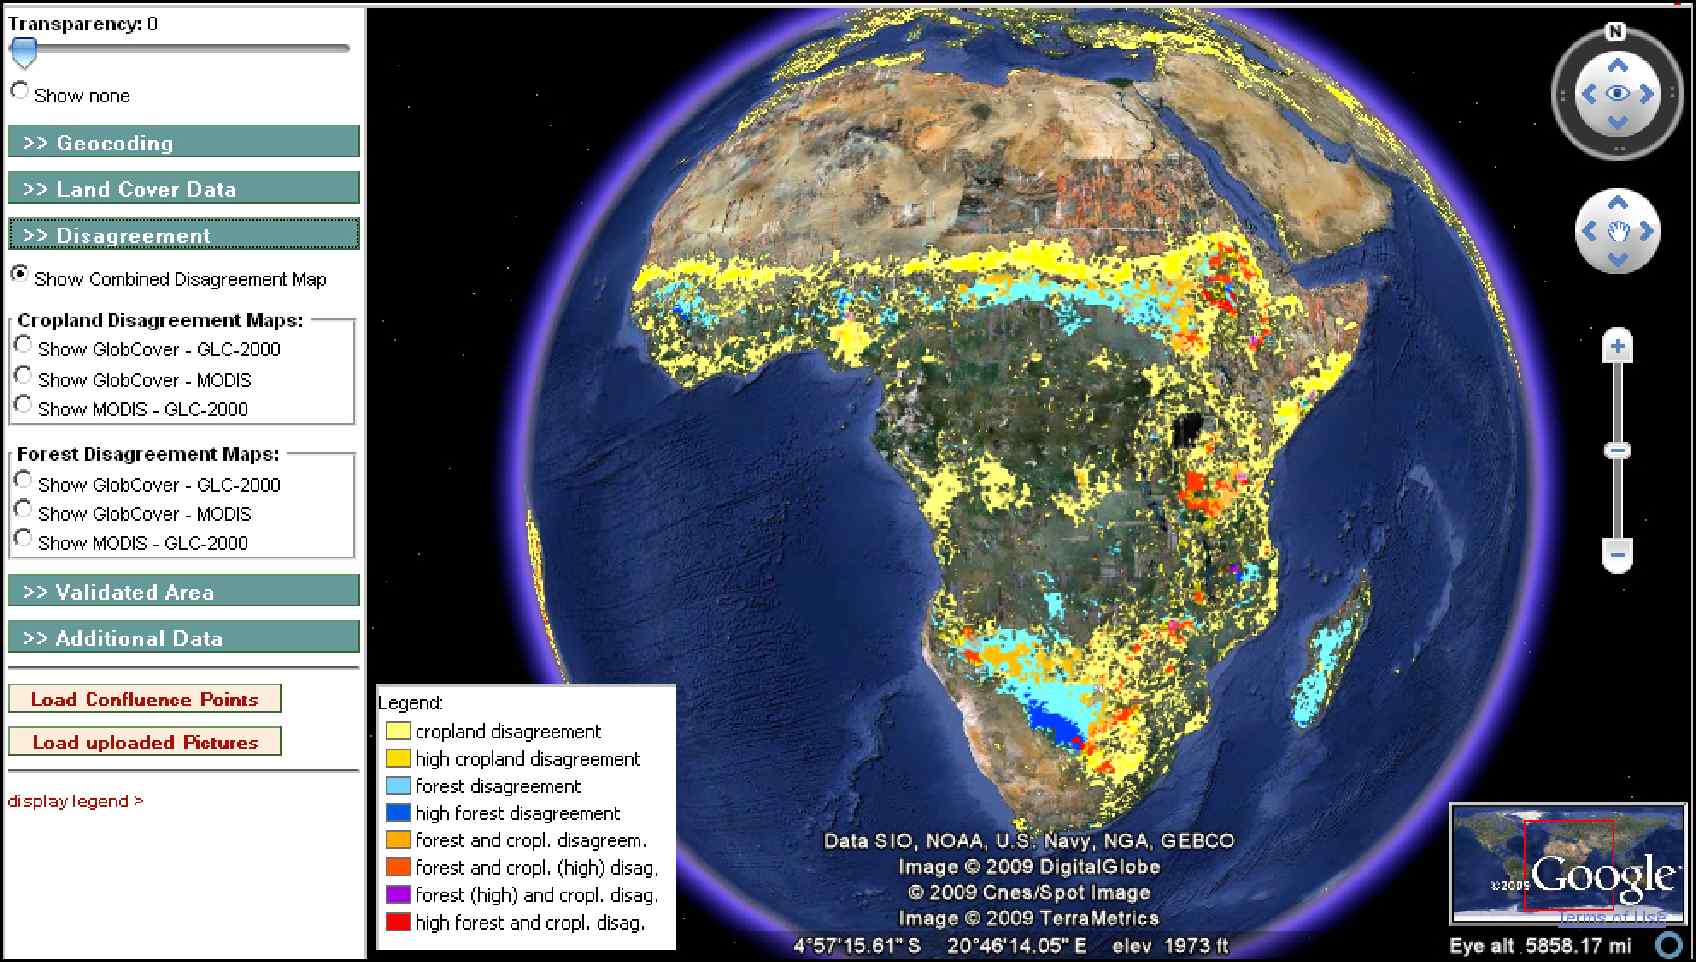 Figure 2. Results of global land cover disagreement in both cropland and forest areas, based on an analysis of three existing land cover products: GLC-2000, MODIS and GlobCover.